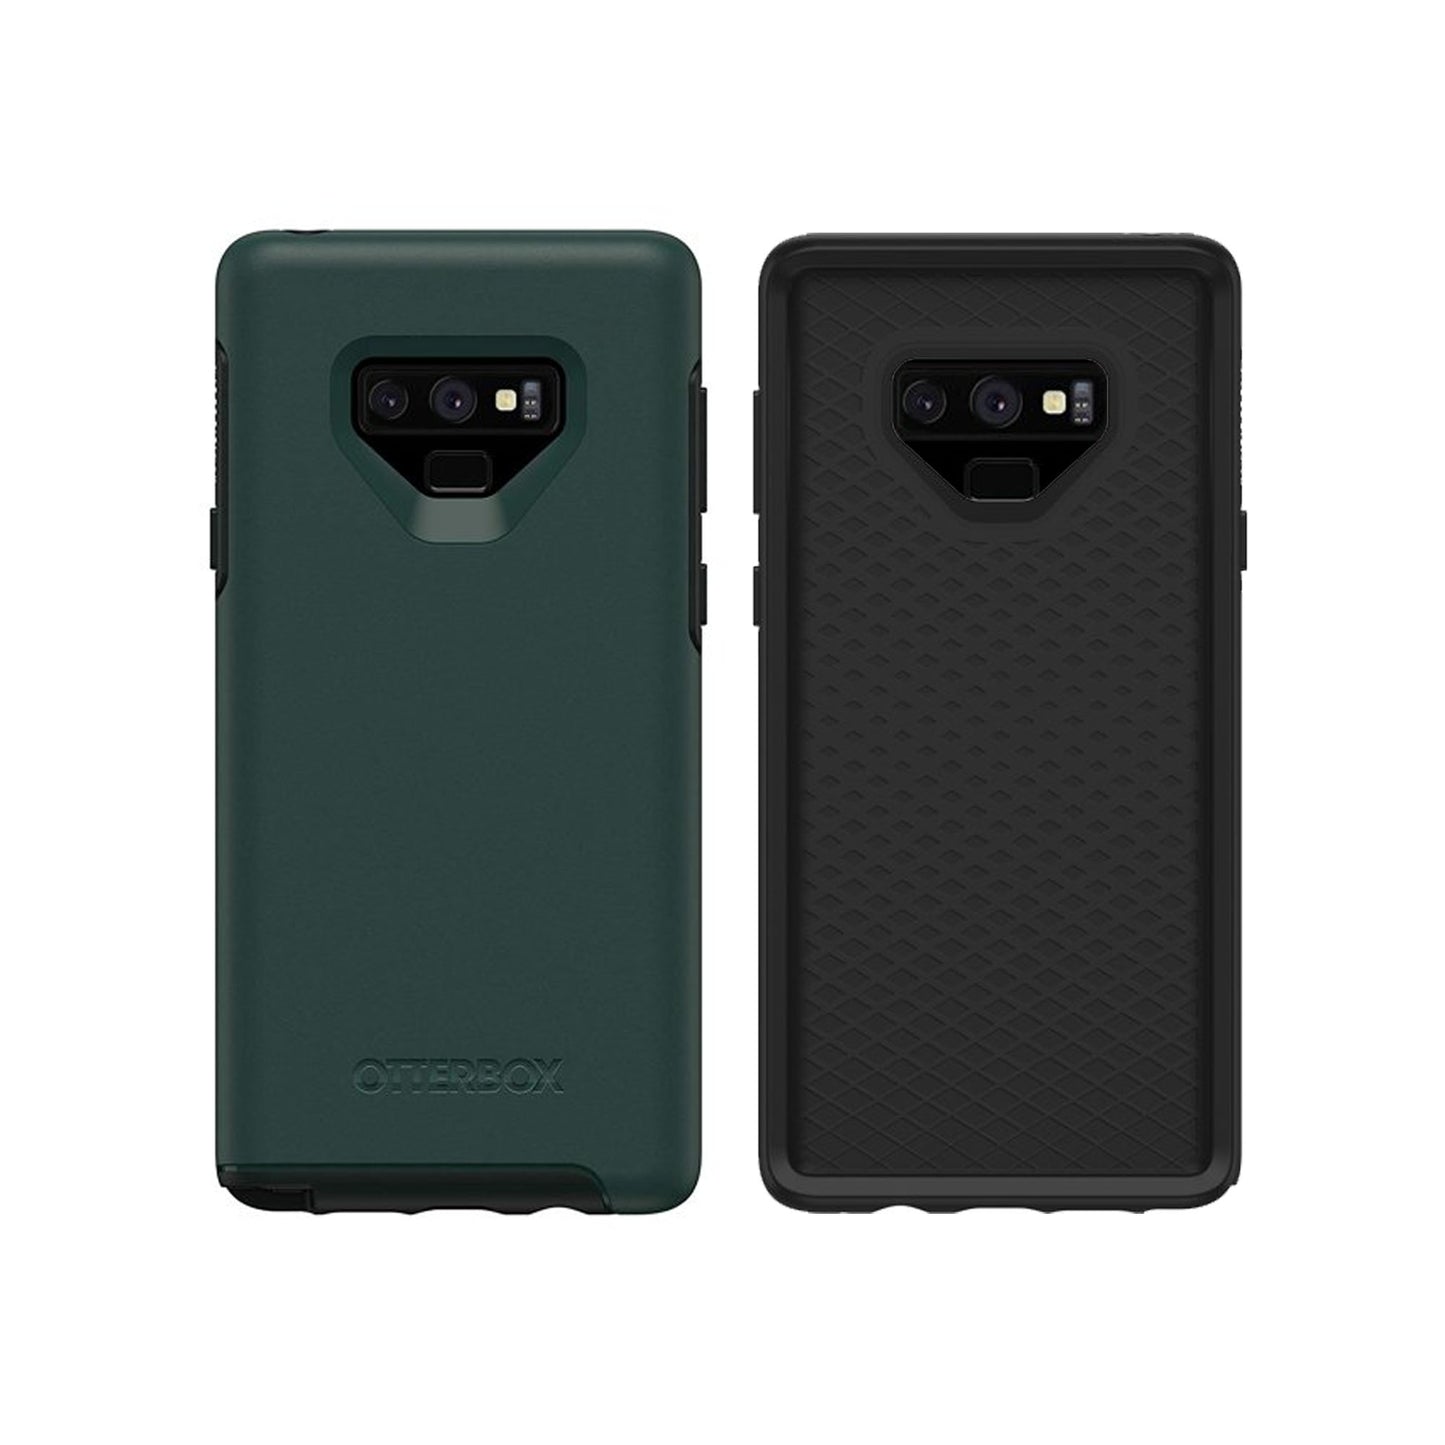 Otterbox Symmetry Case for Samsung Galaxy Note 9 - Black (Barcode: 660543462705 )